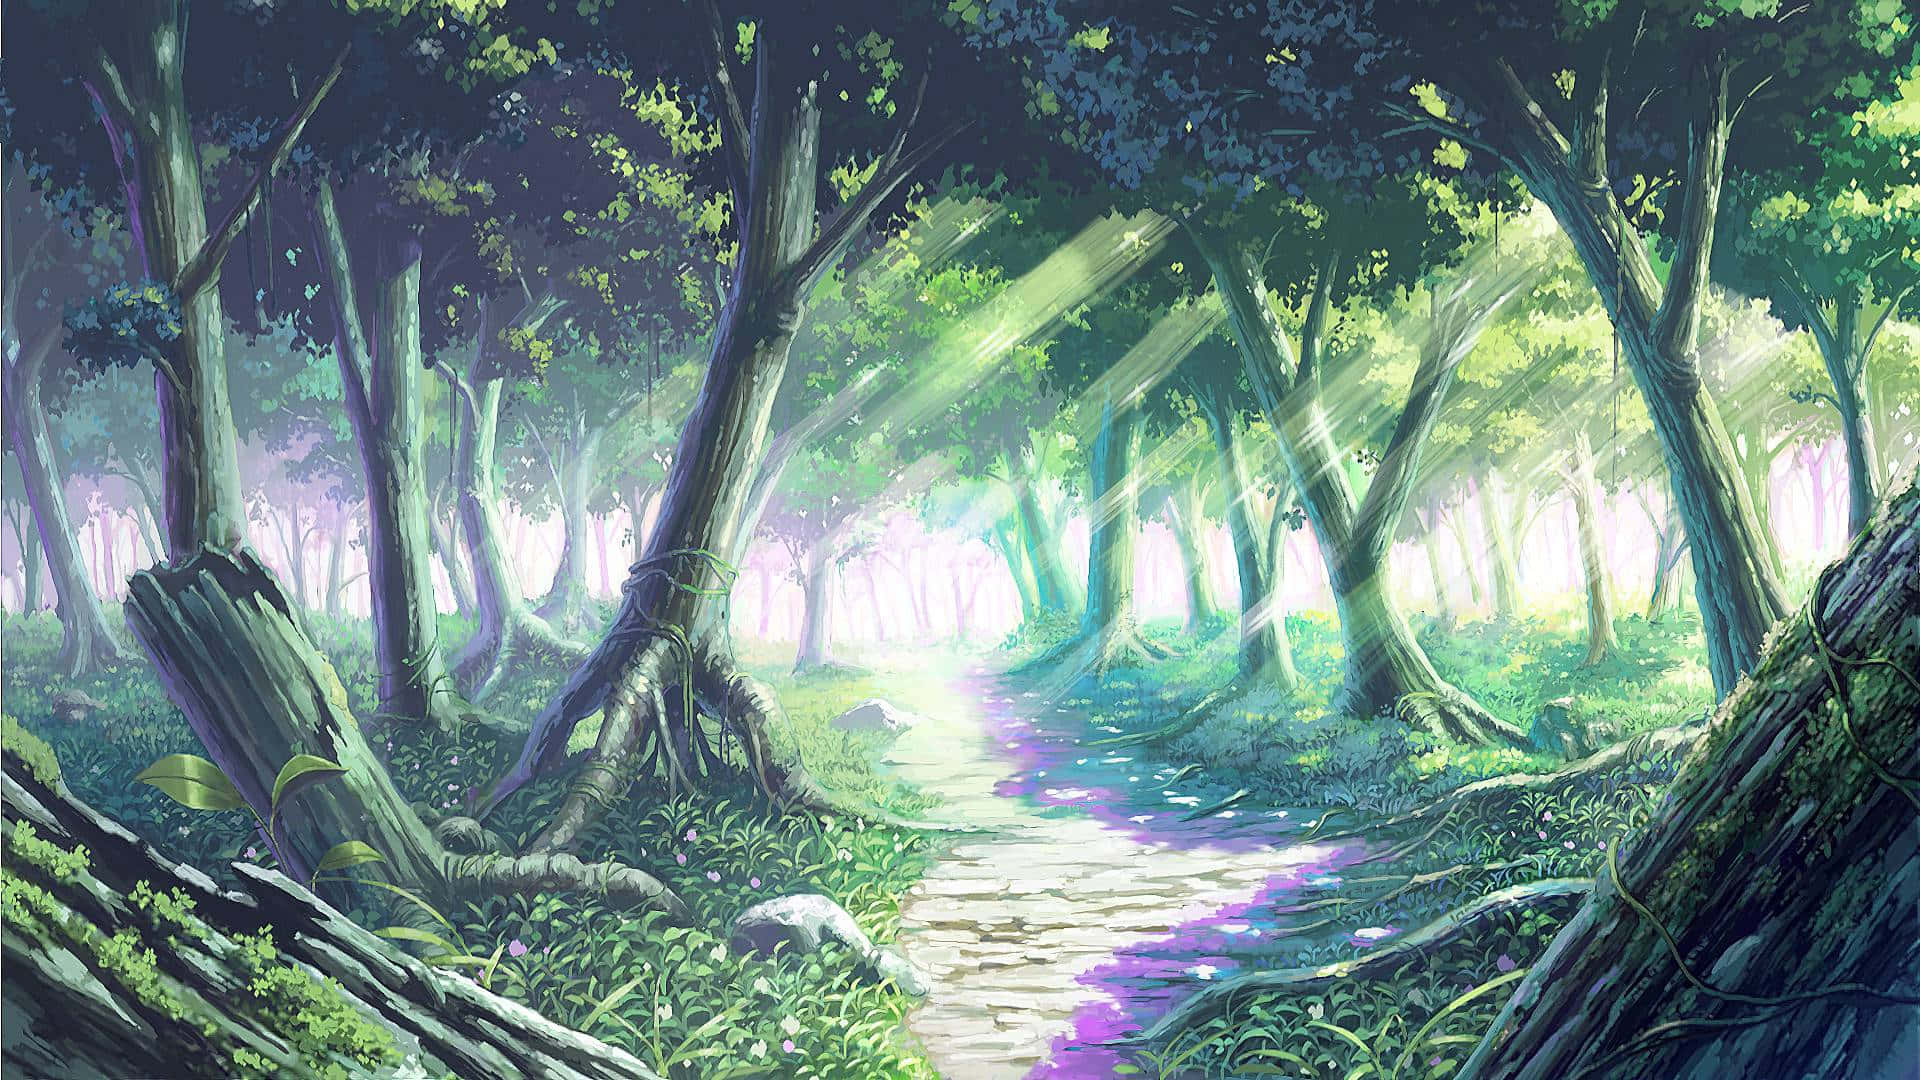 Get lost exploring the secrets of Anime Forest